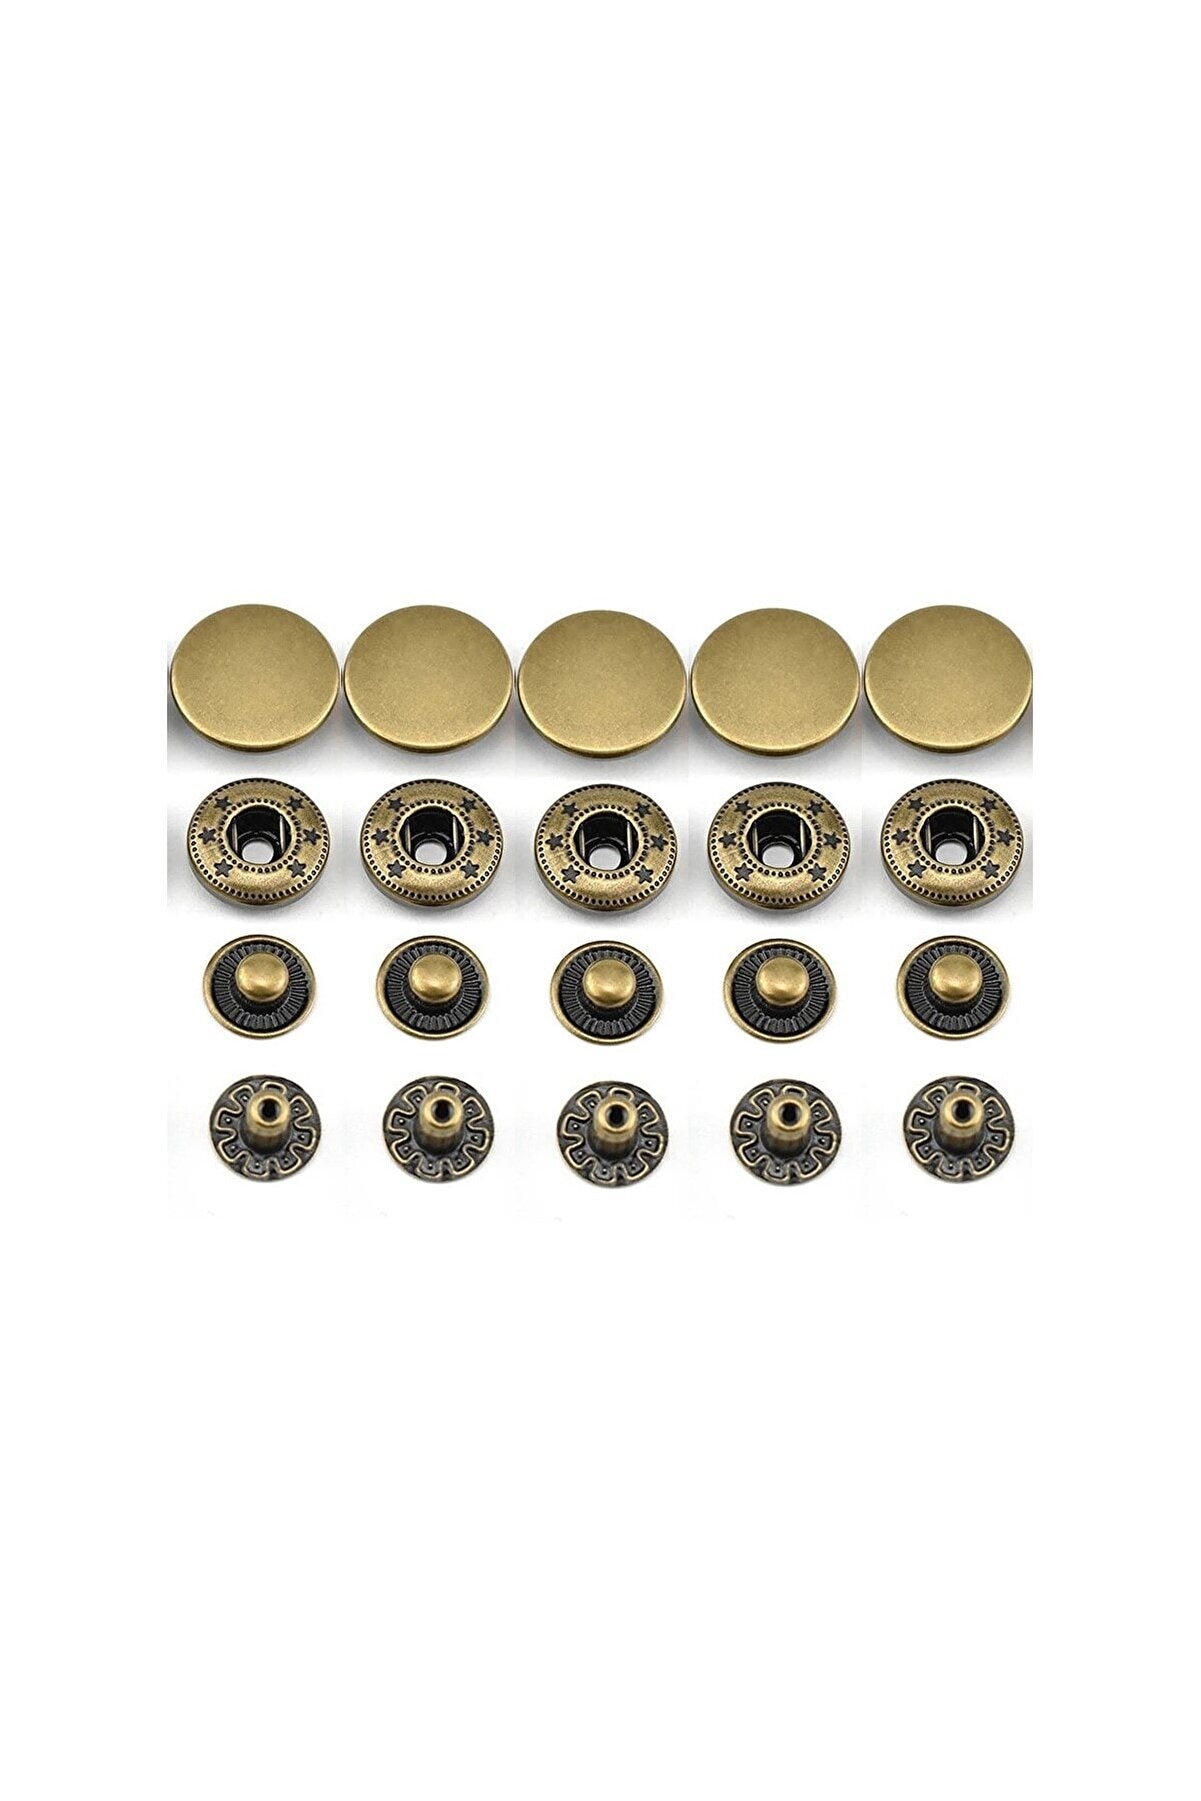 15mm 61 Studs. (720 set / Stainless Material)